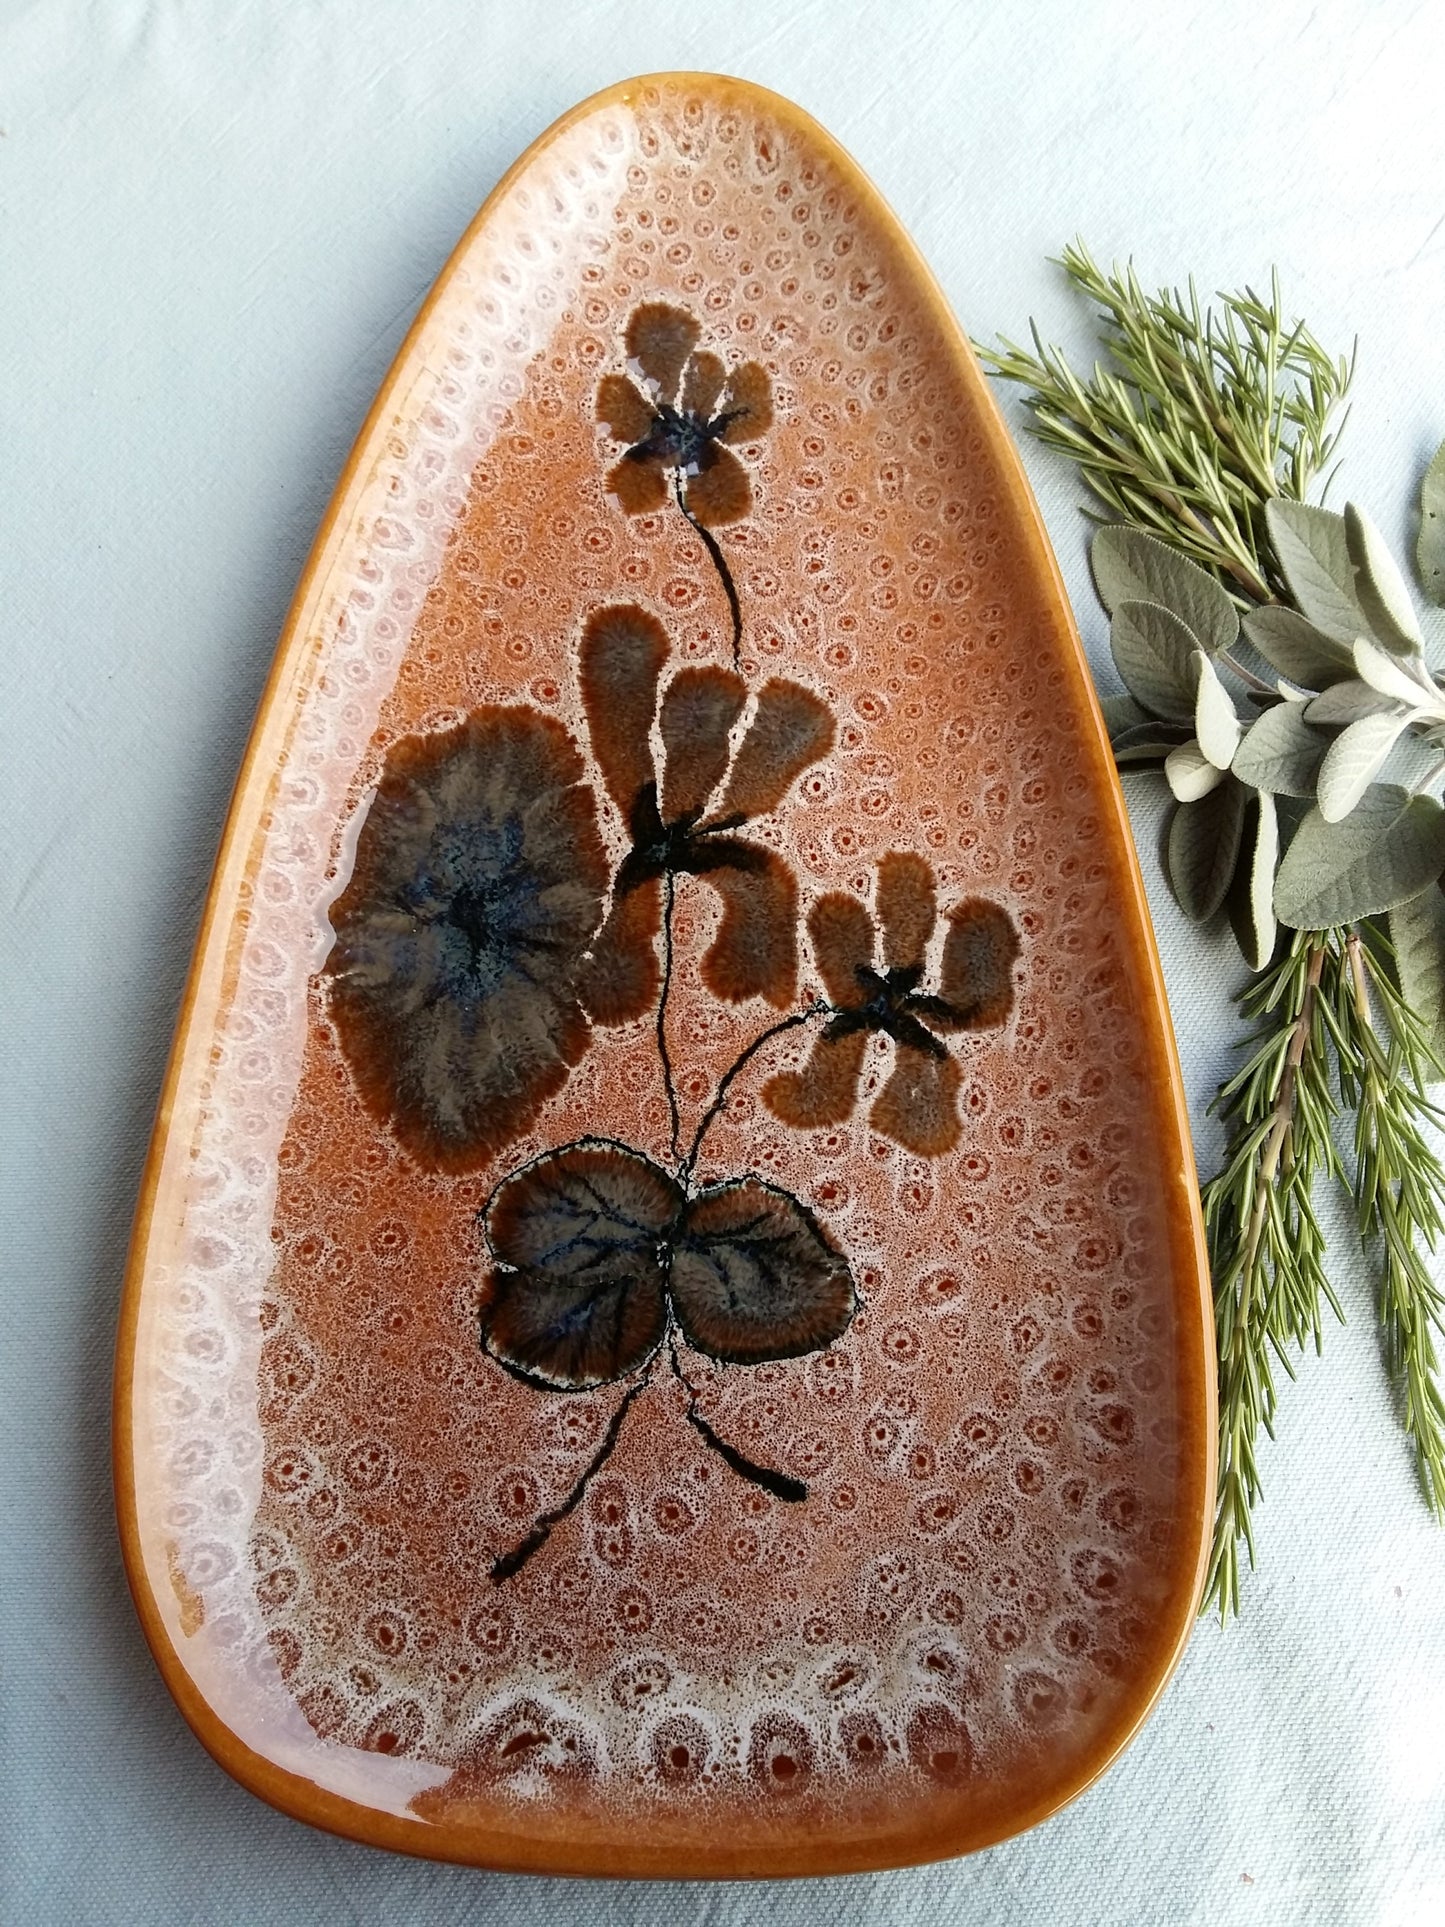 Hand Painted Autumnal Platter. MBFA Pornic Earthenware Pottery of Brittany, France. from Tiggy & Pip - €149.00! Shop now at Tiggy and Pip